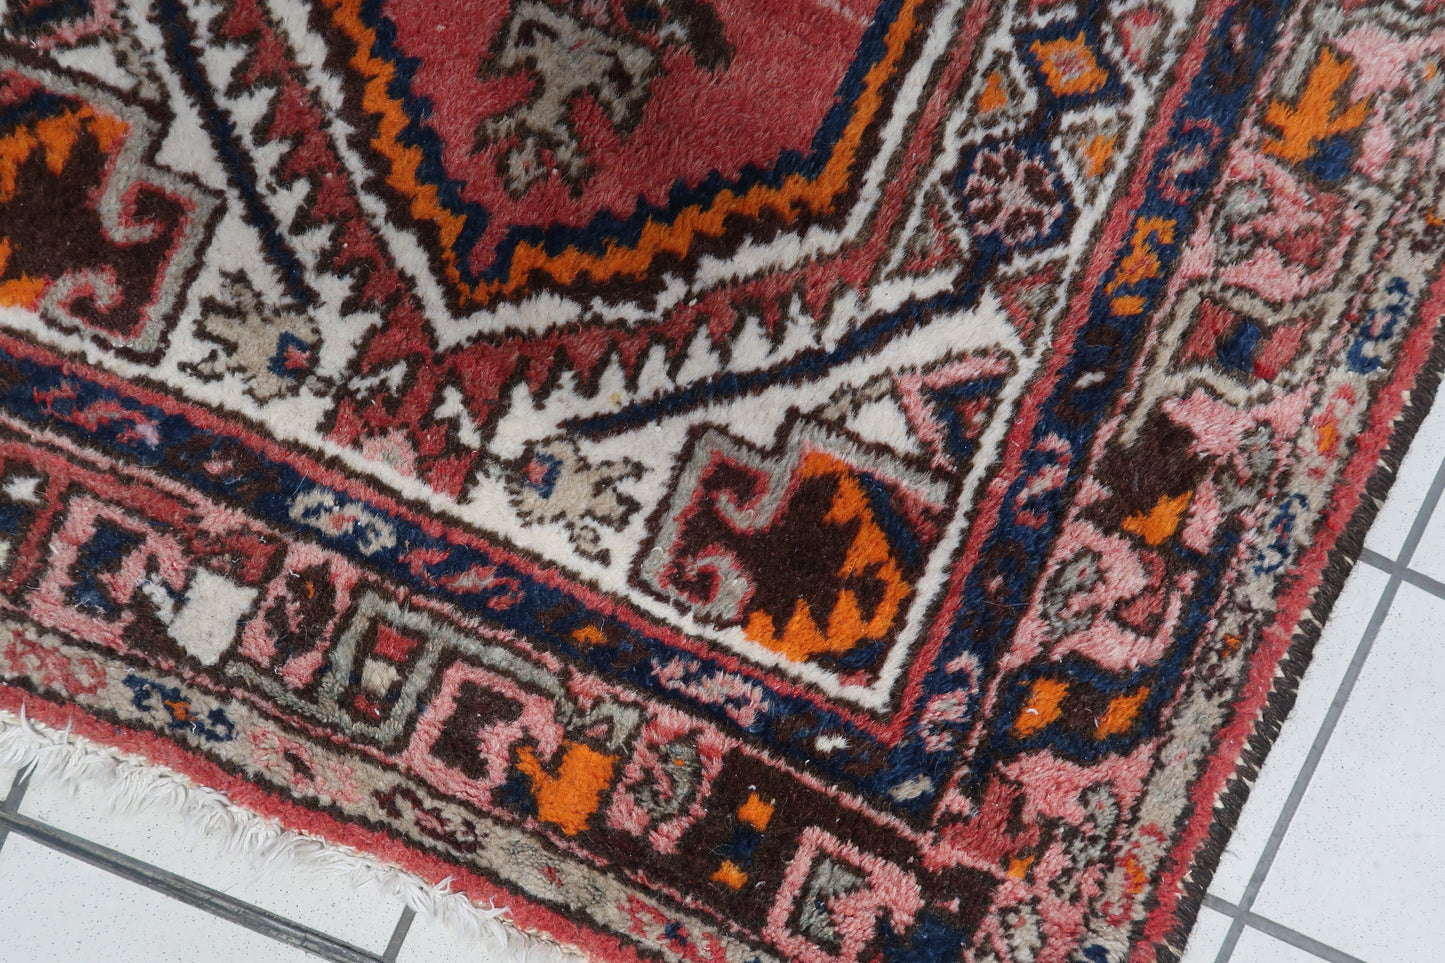 Detailed view of the soft wool texture on the surface of the rug